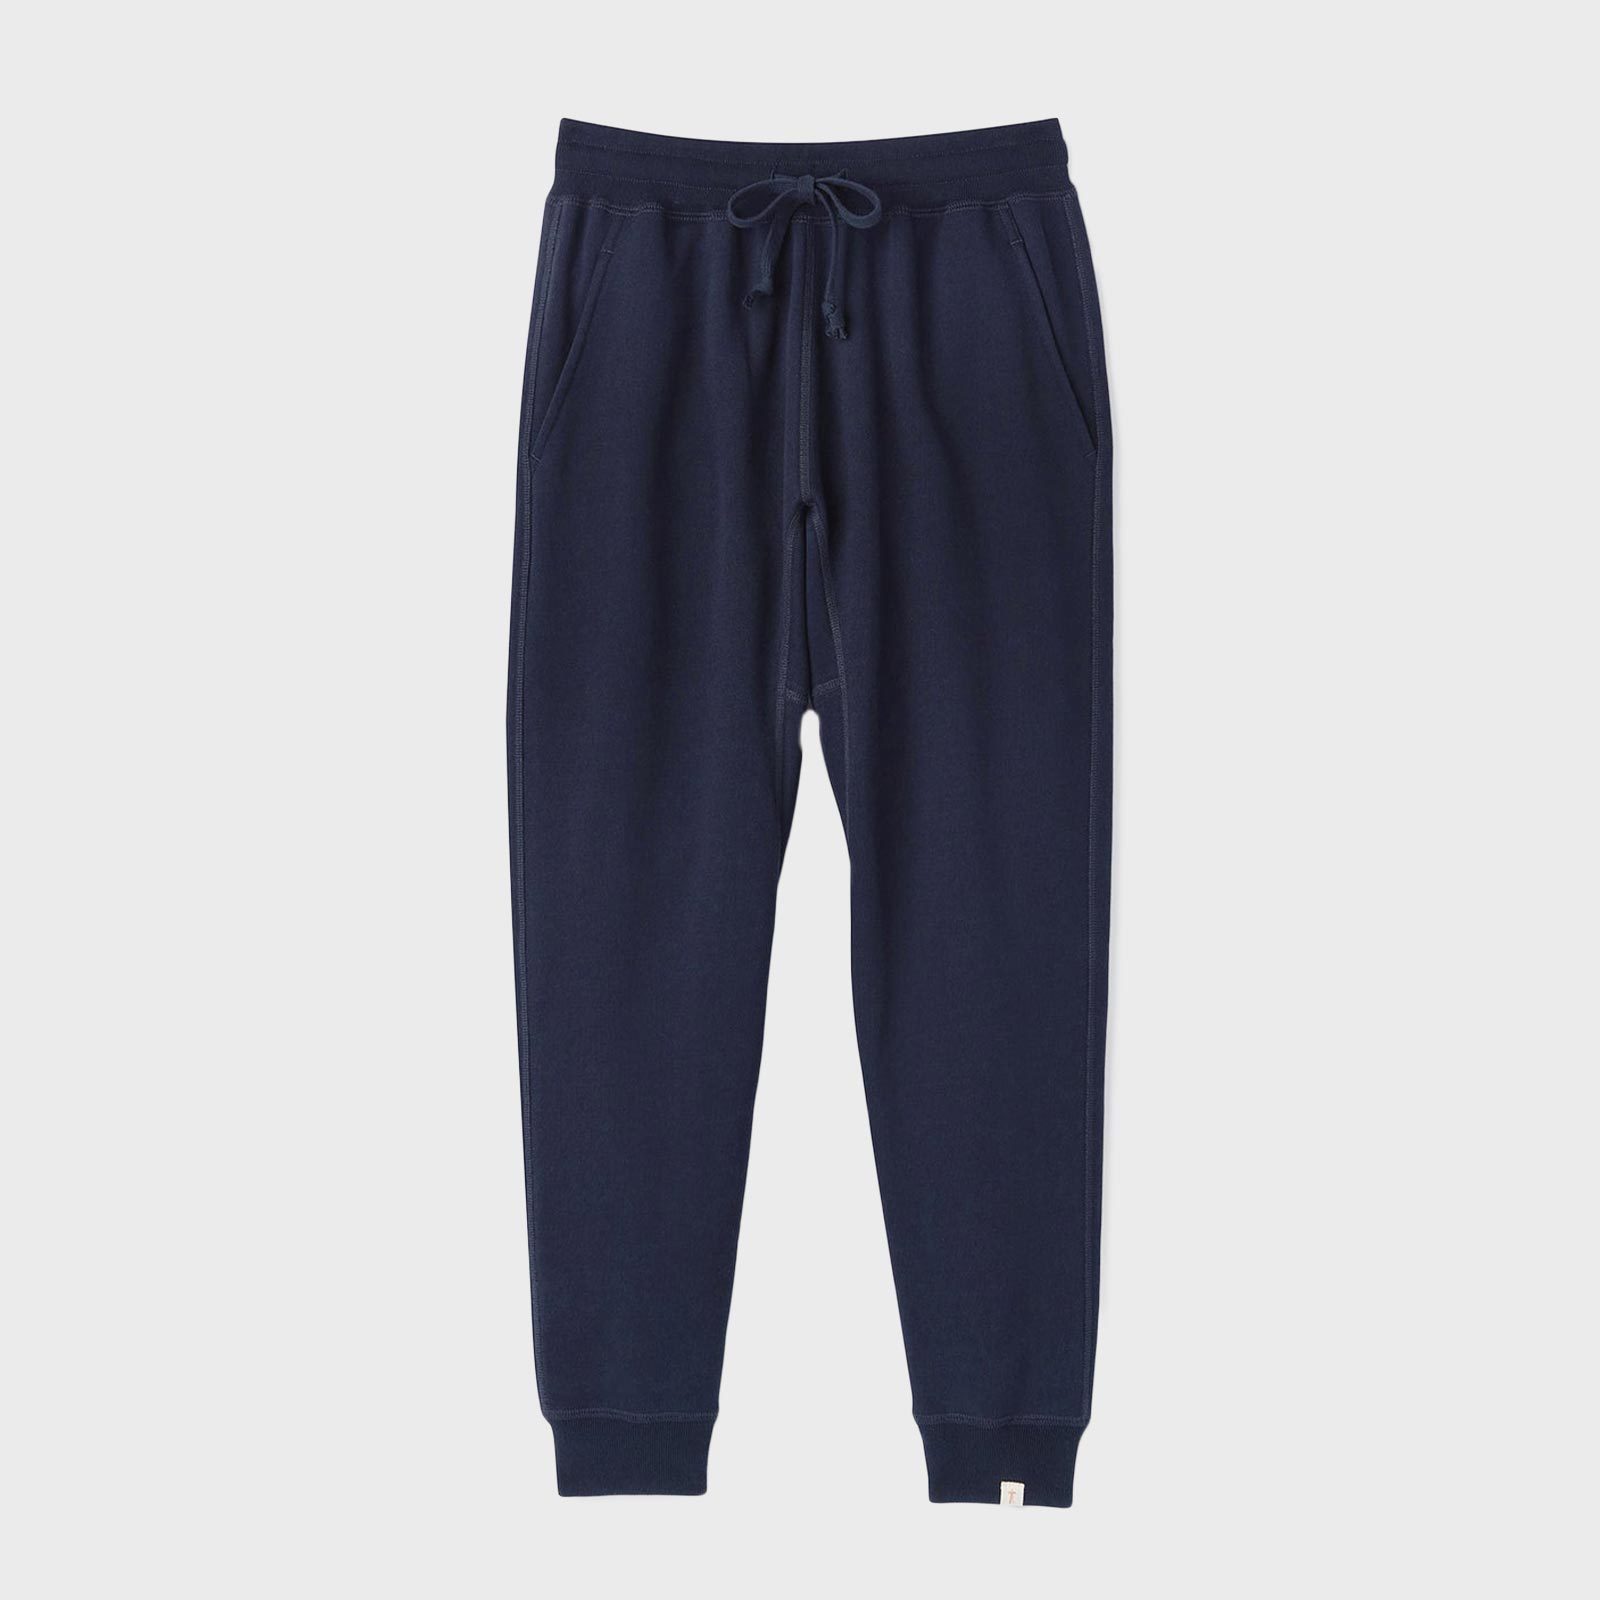 Women's Tapered Perfect Sweatpants - Wild Fable Blue XS